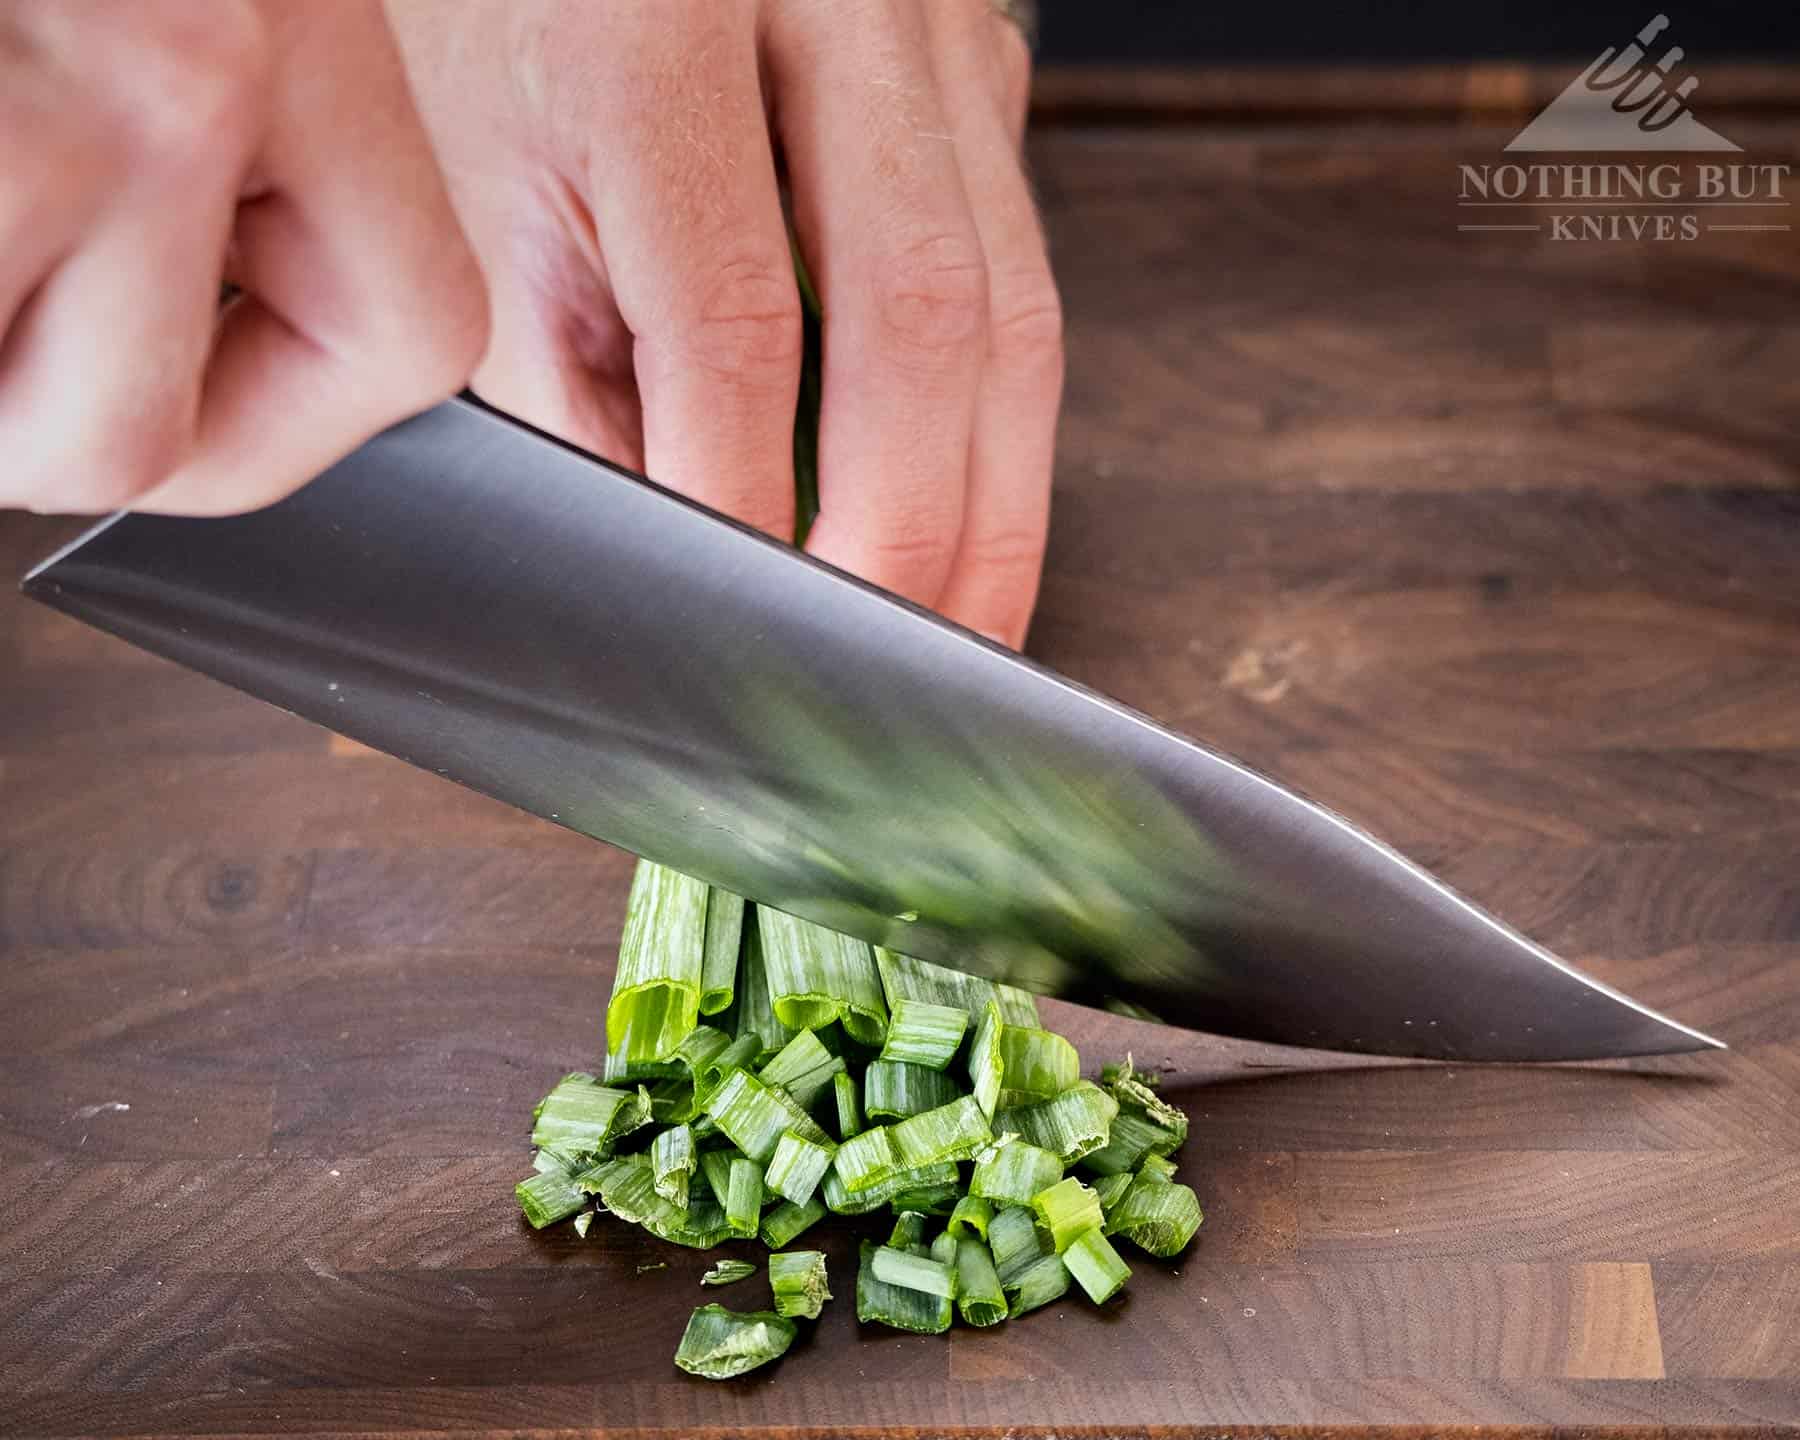 The Mattia Borrani Bowie chef knife is not the best choices for cutting super fine pieces. It is shown here chopping green onions. 